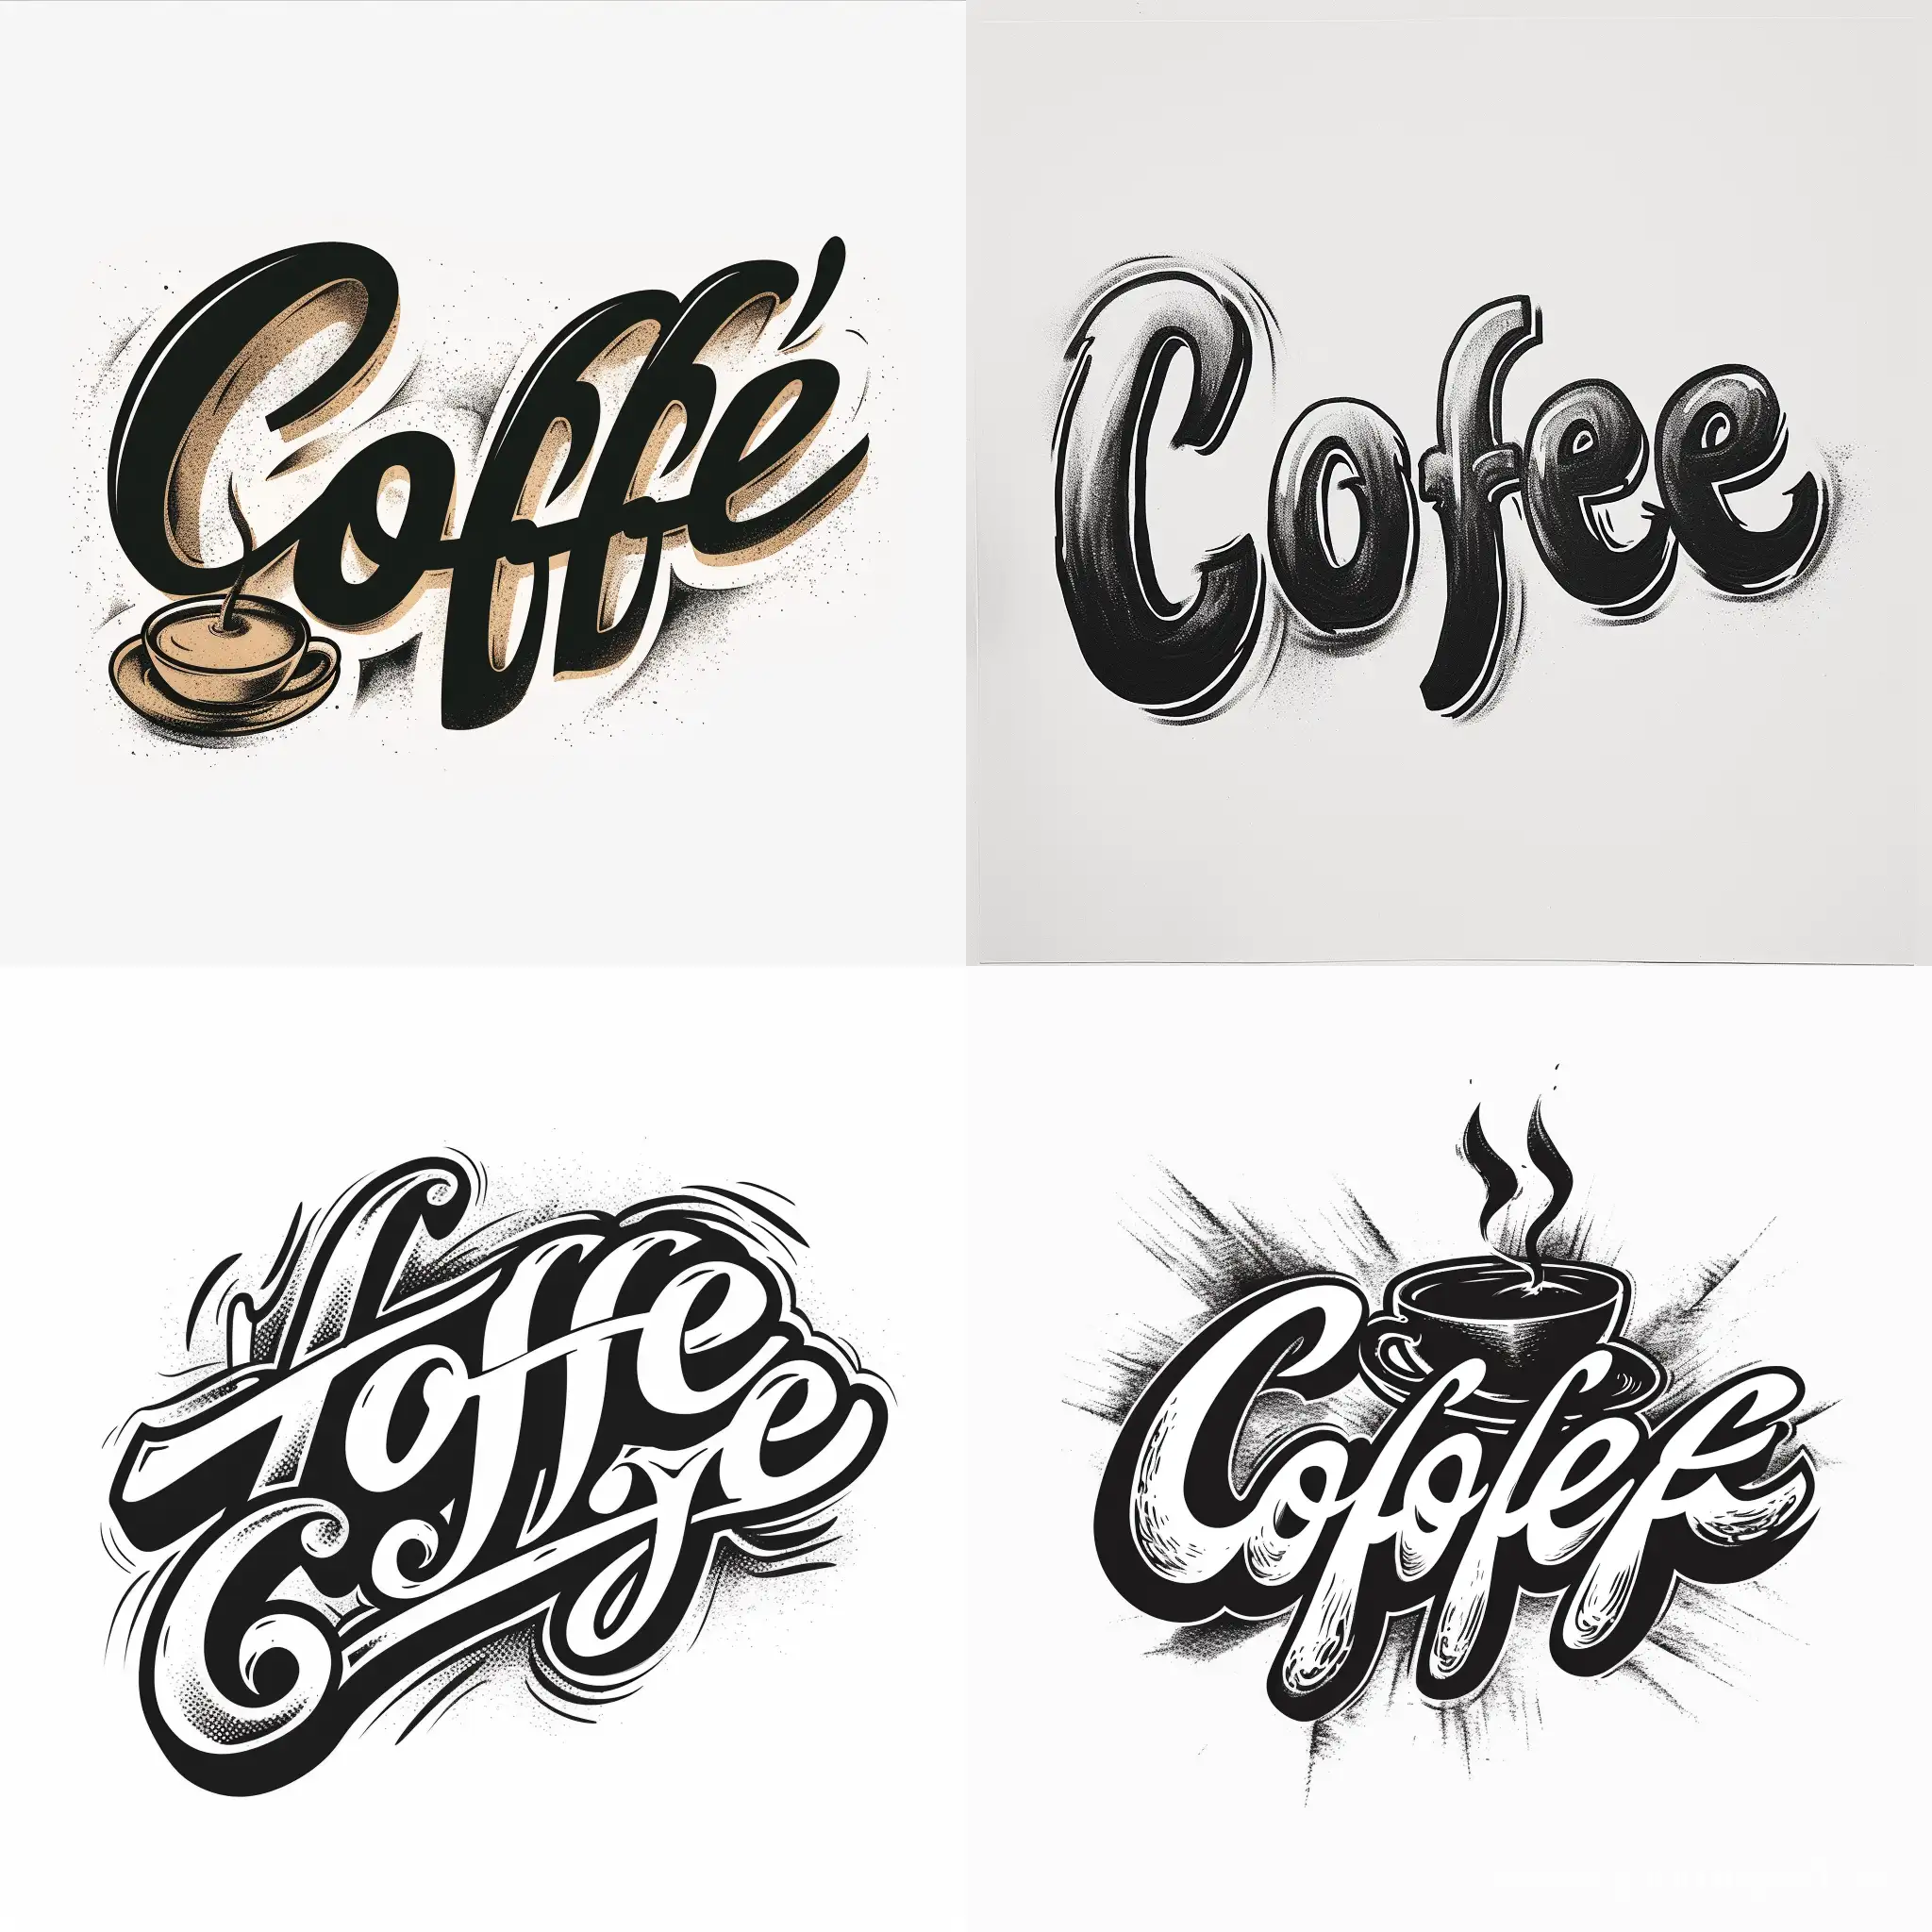 Stylish-Espresso-Lettering-Tattoo-in-Cool-Calligraphy-Font